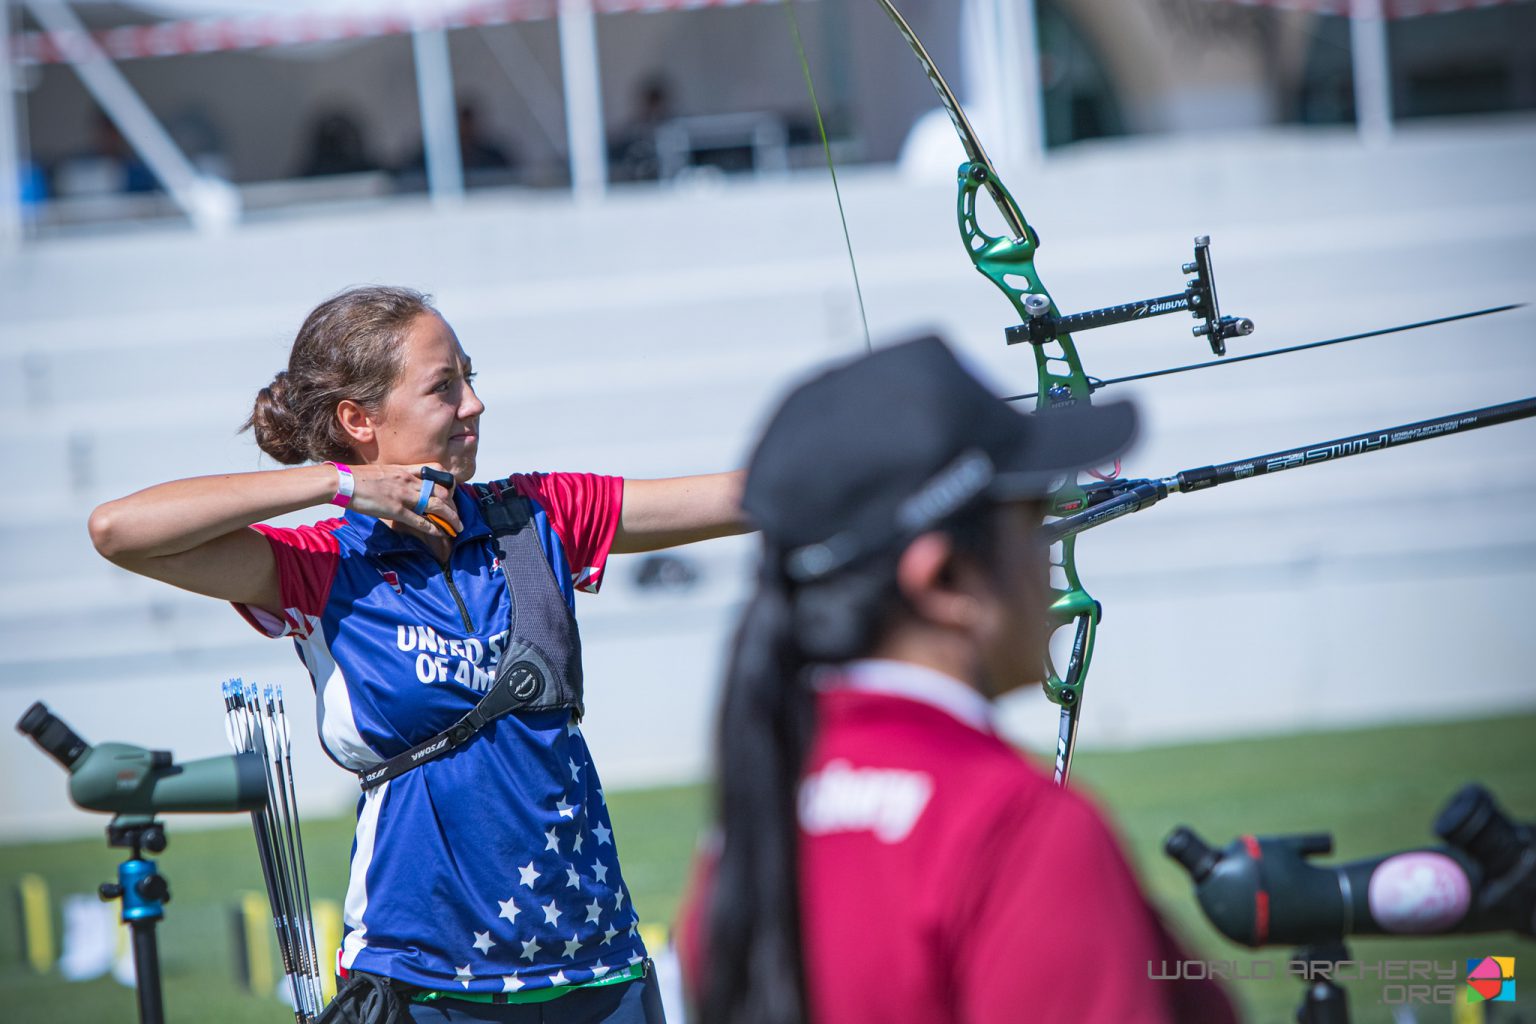 A Guide to Olympic Archery in the Tokyo 2020 Summer Games